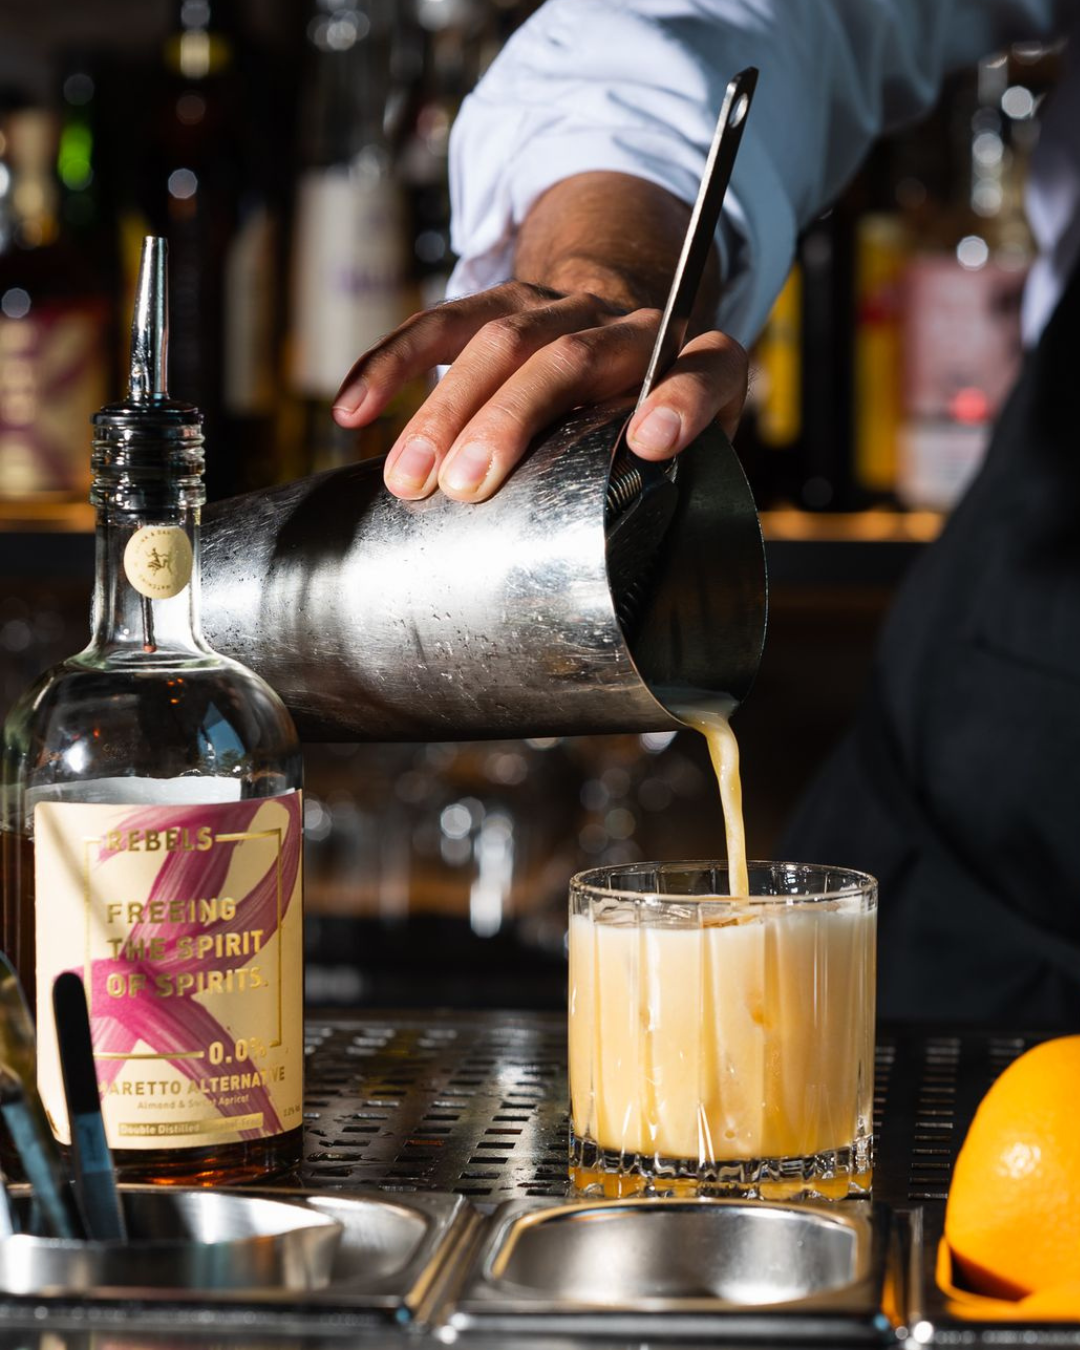 OUR AMARETTO WAS SELECTED AS "TOP PRODUCT" BY MIXOLOGY MAG